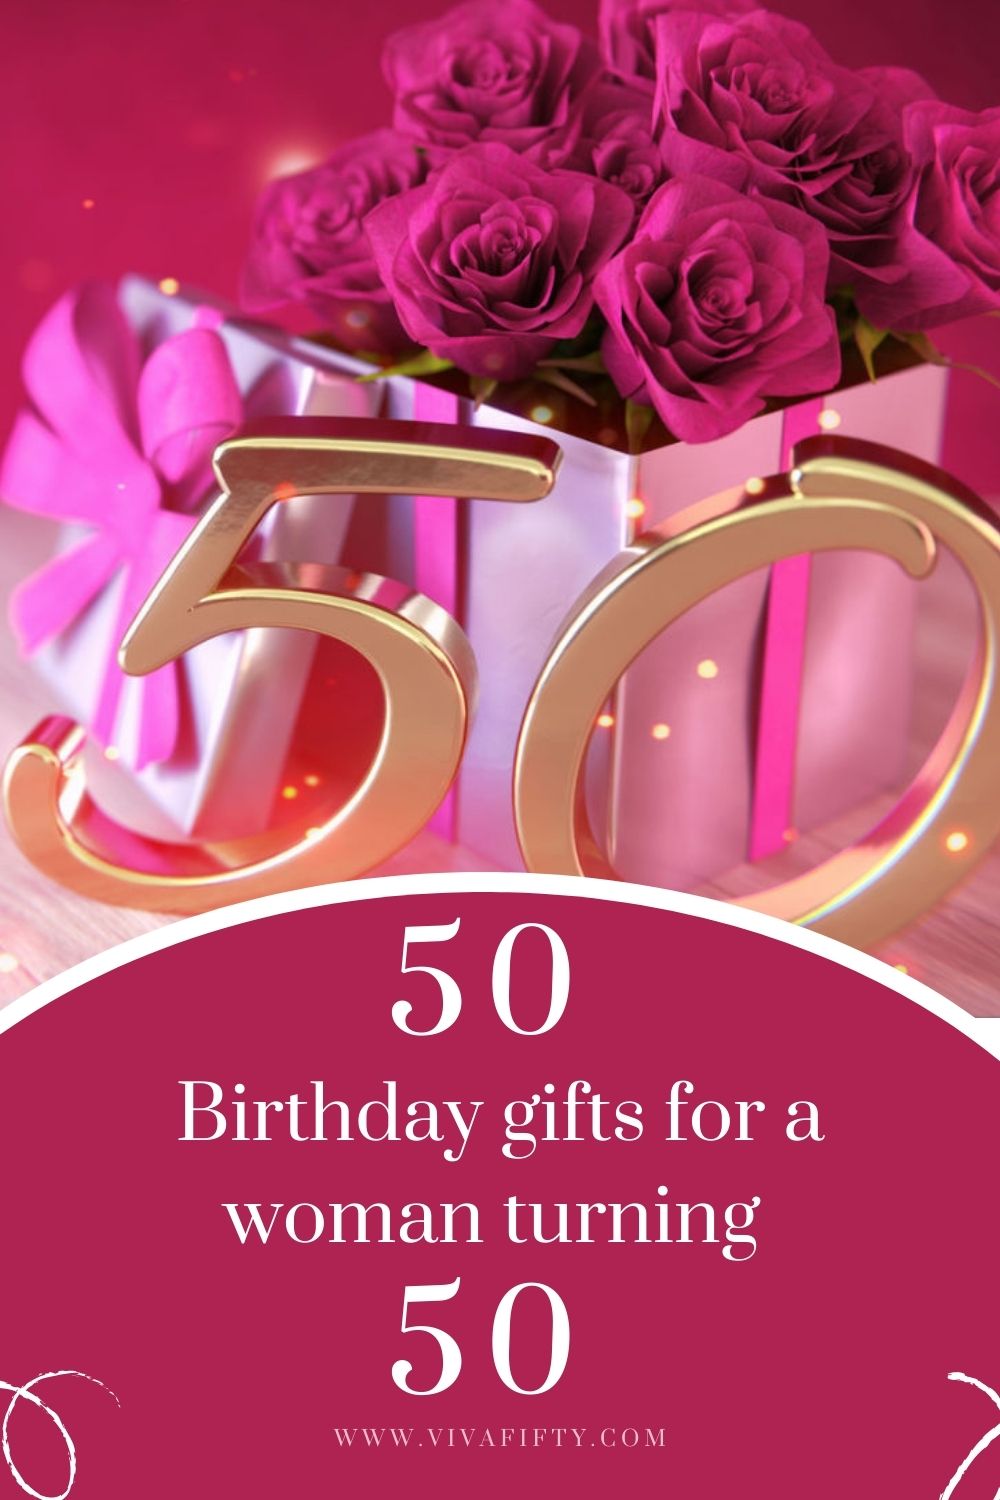 50th Birthday Gifts Blanket, 50th Birthday Gift for Women, 50 Birthday Gift  for Women Turning 50, Gift for 50th Birthday Woman, 50th Bday Gift for  Women, 50th Birthday Decorations for Women :